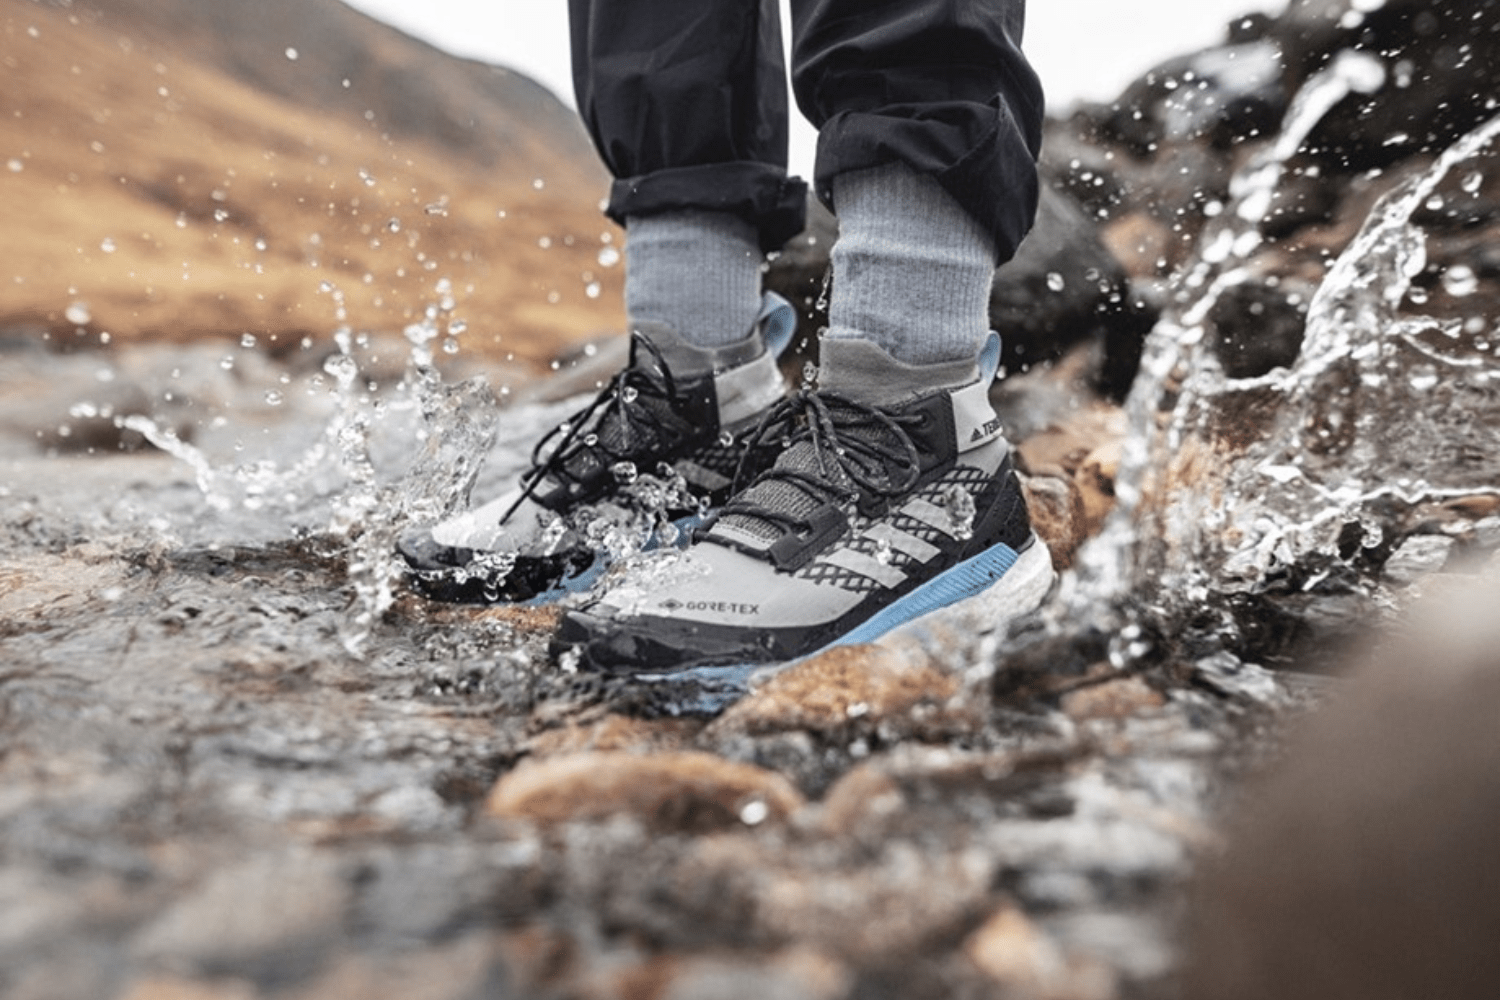 Shop these waterproof sneakers for protection against wet weather